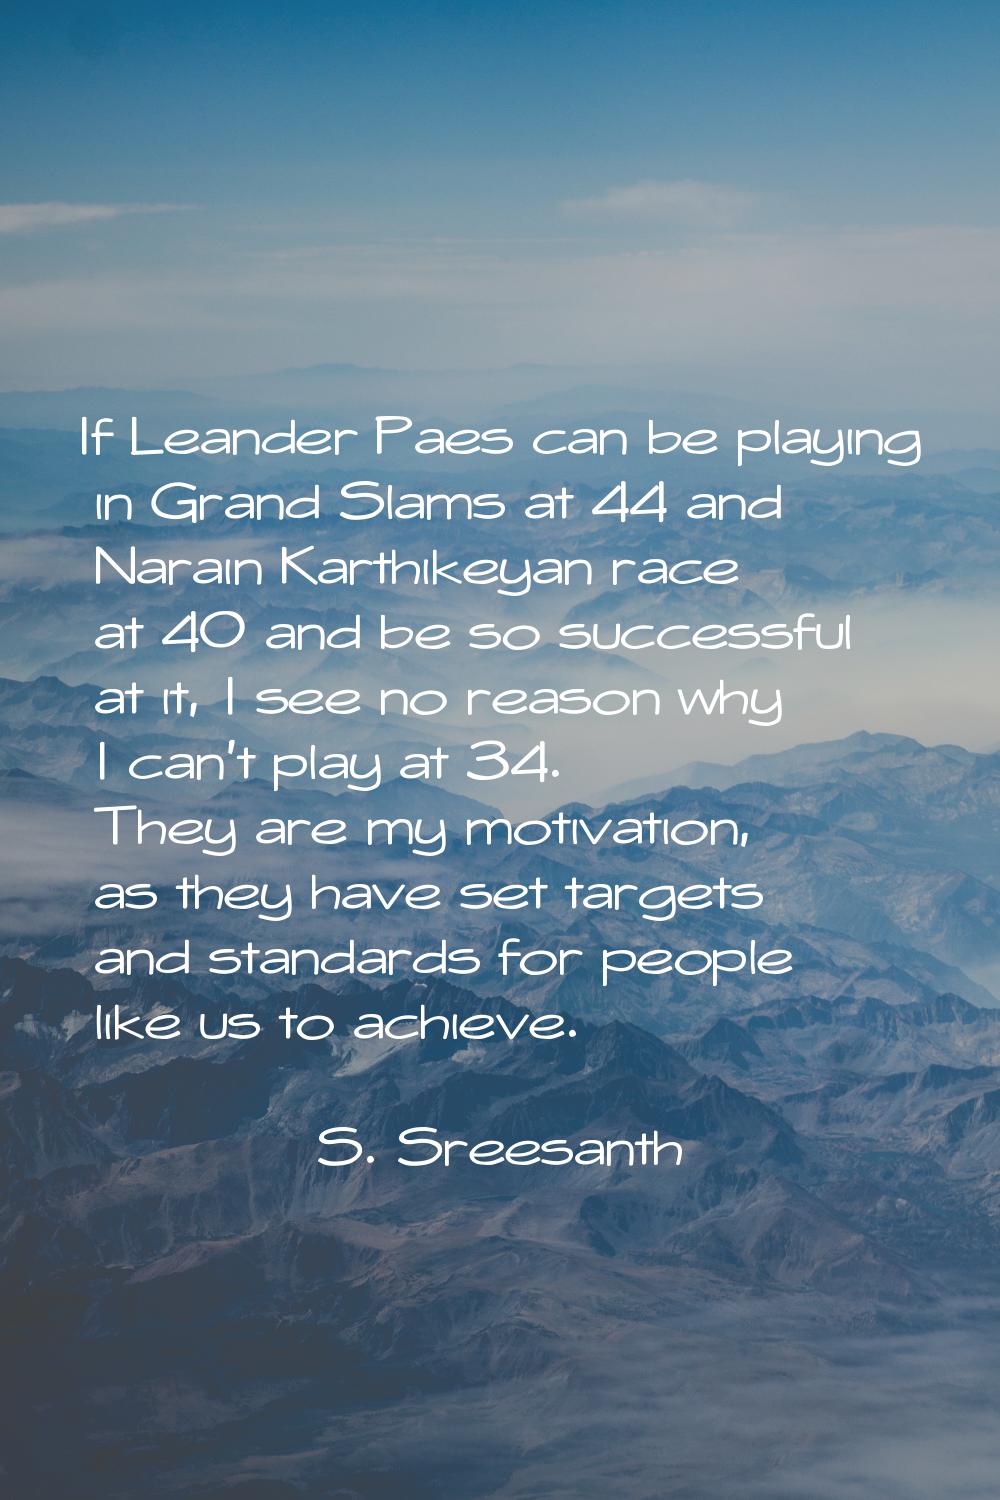 If Leander Paes can be playing in Grand Slams at 44 and Narain Karthikeyan race at 40 and be so suc